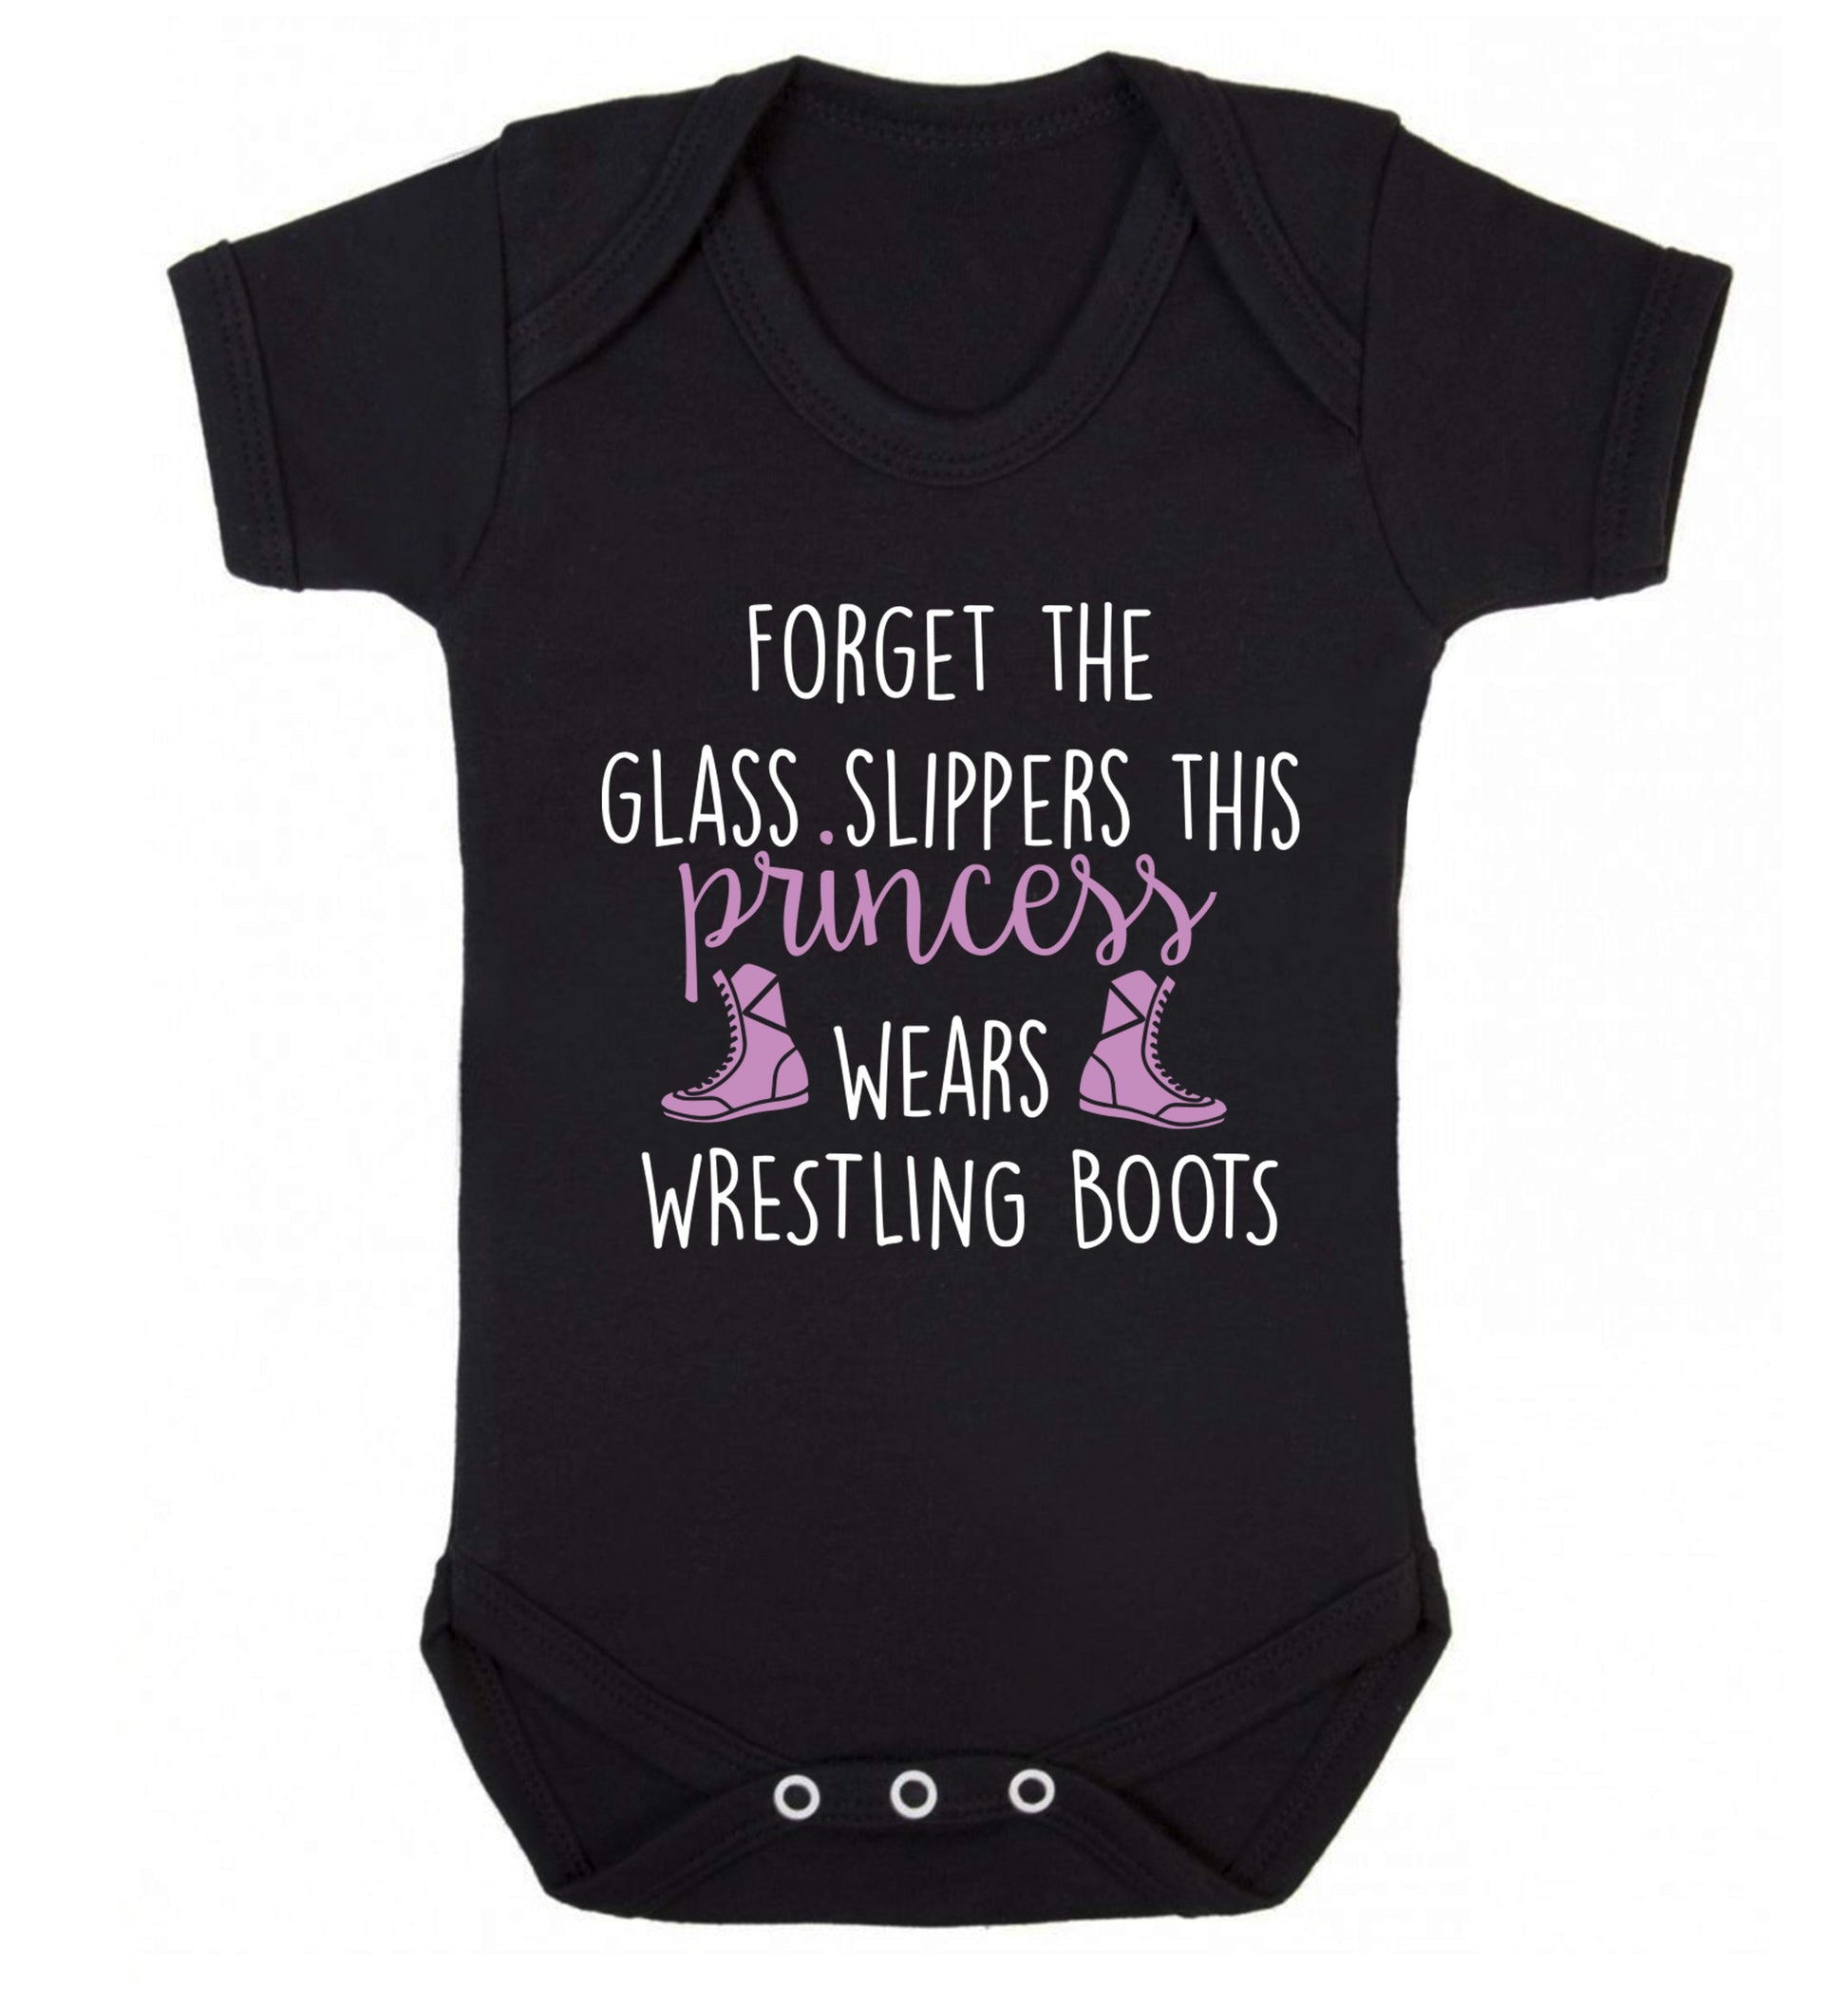 Forget the glass slippers this princess wears wrestling boots Baby Vest black 18-24 months